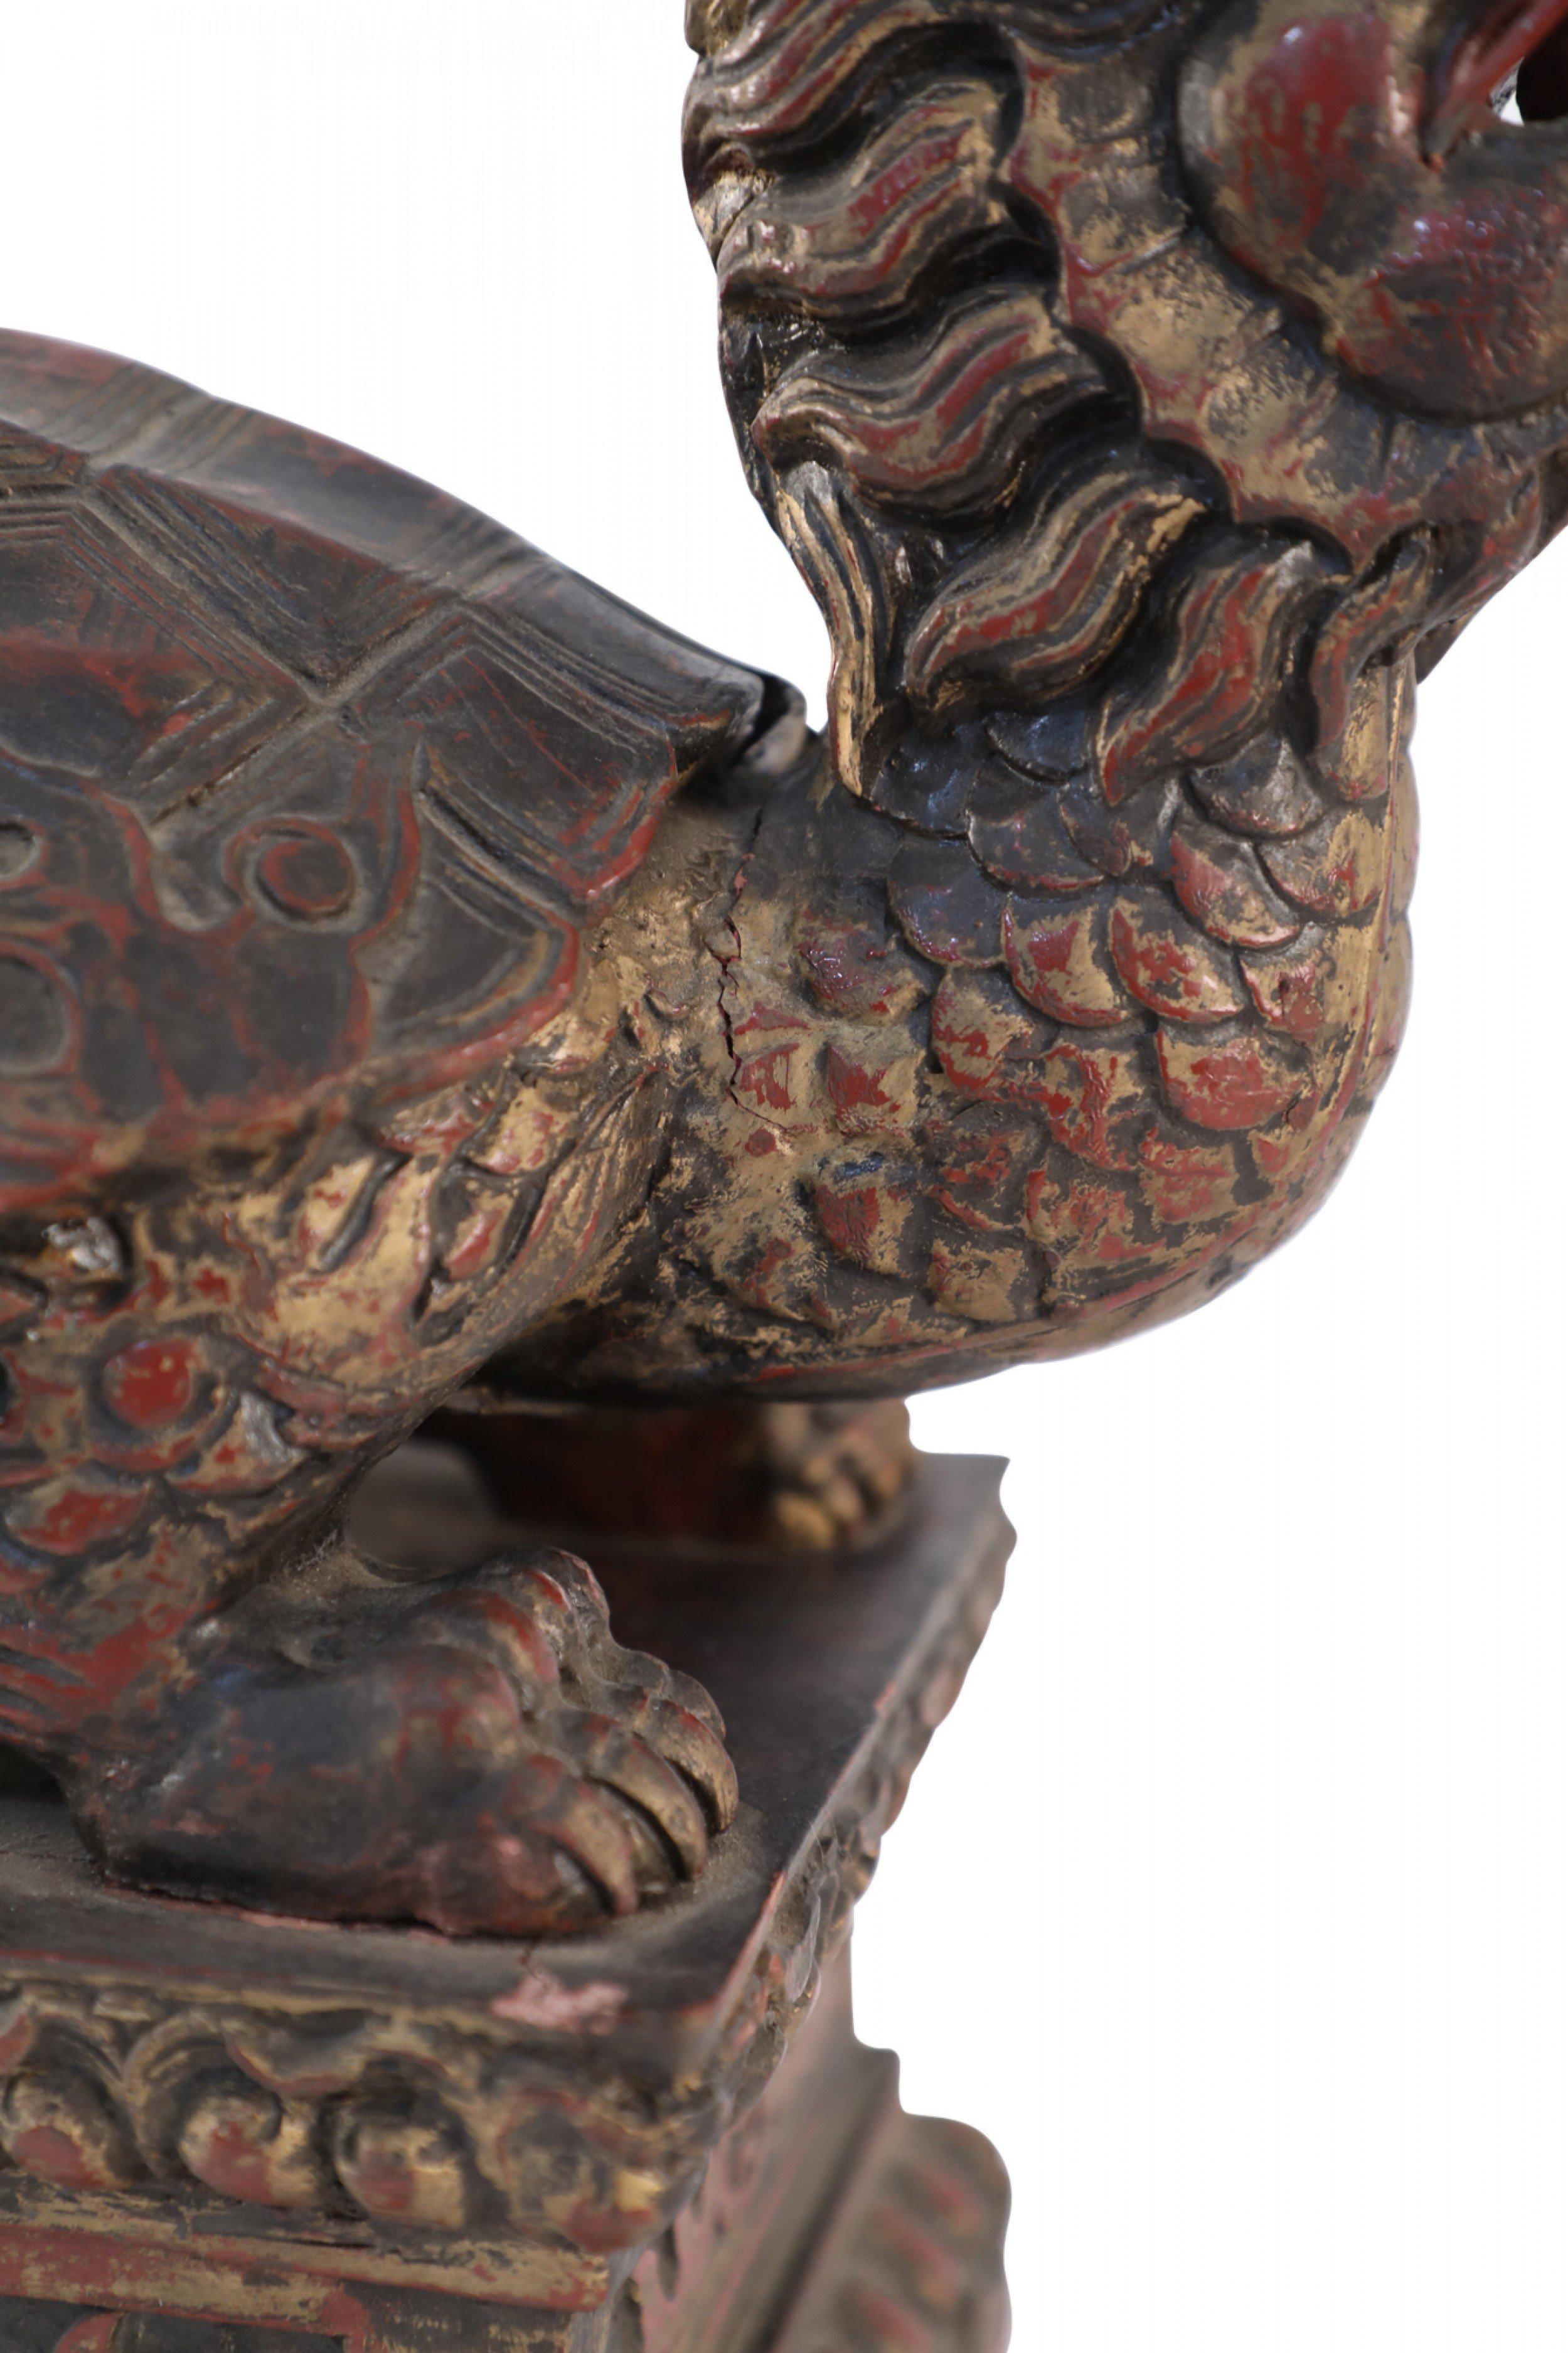 Antique Chinese carved wooden sculpture of a Longgui or (dragon turtle) holding a coin in its mouth on an ornately carved wooden base.
      